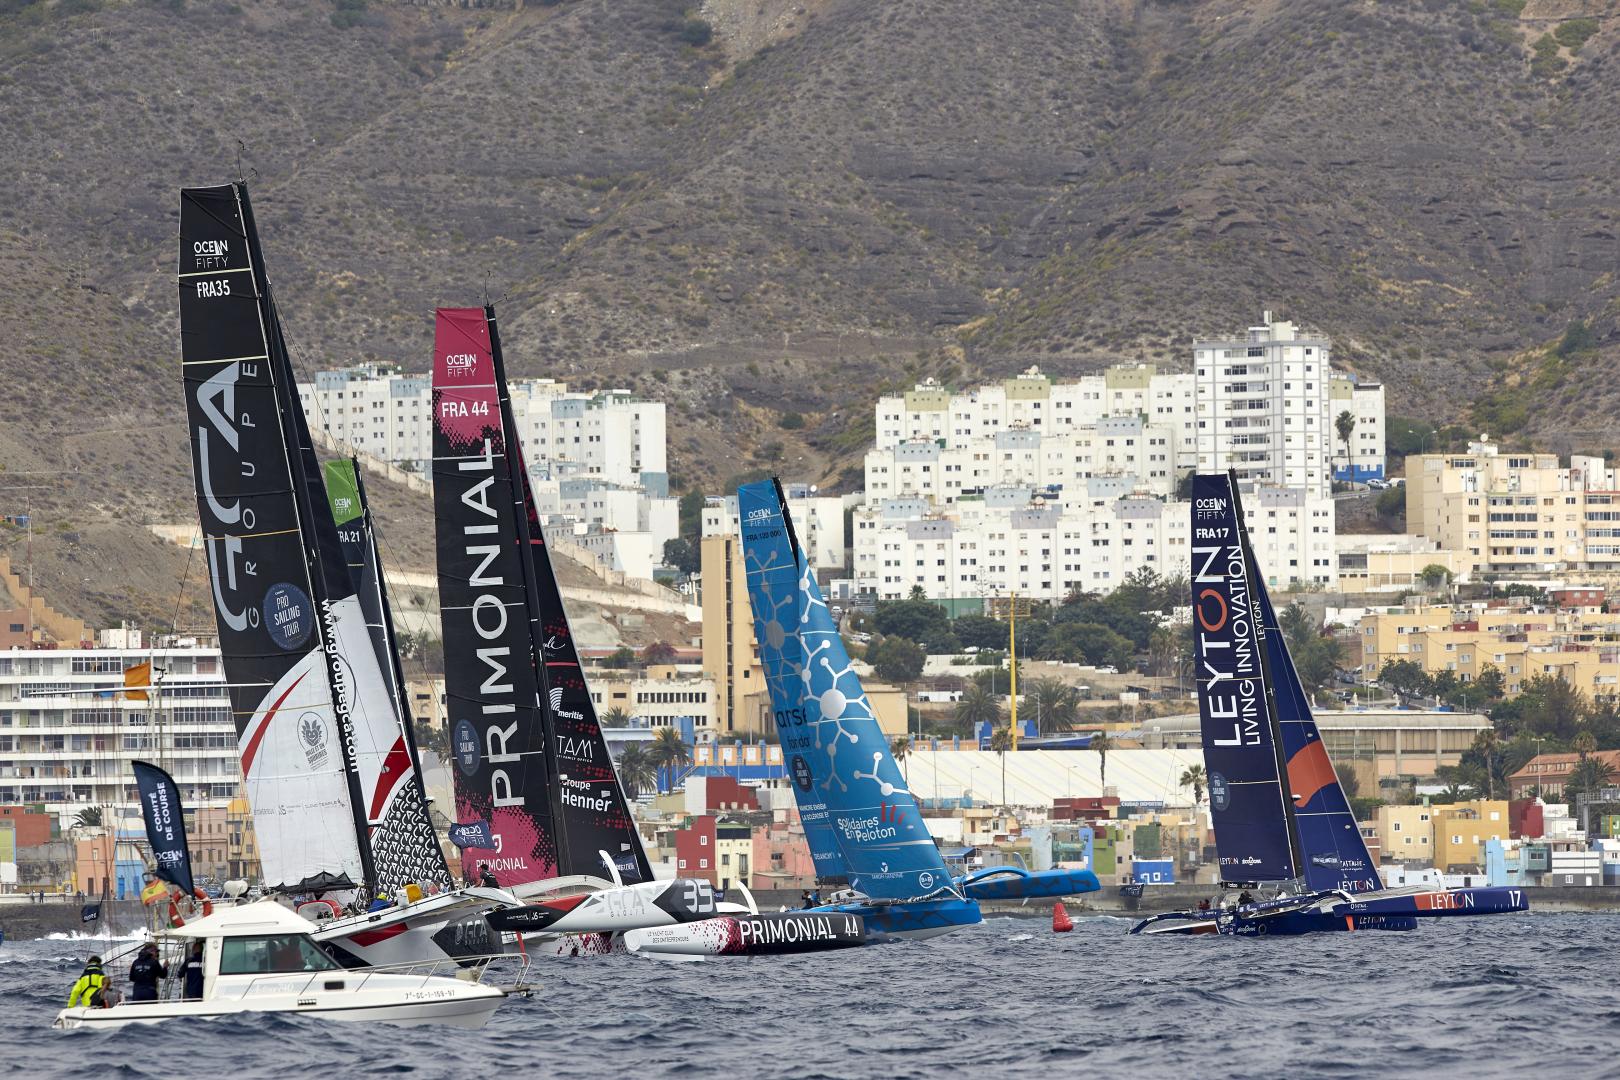 The Pro Sailing Tour third stage gets off to flying start
Seven Ocean Fifty’s in Las Palmas de Gran Canaria